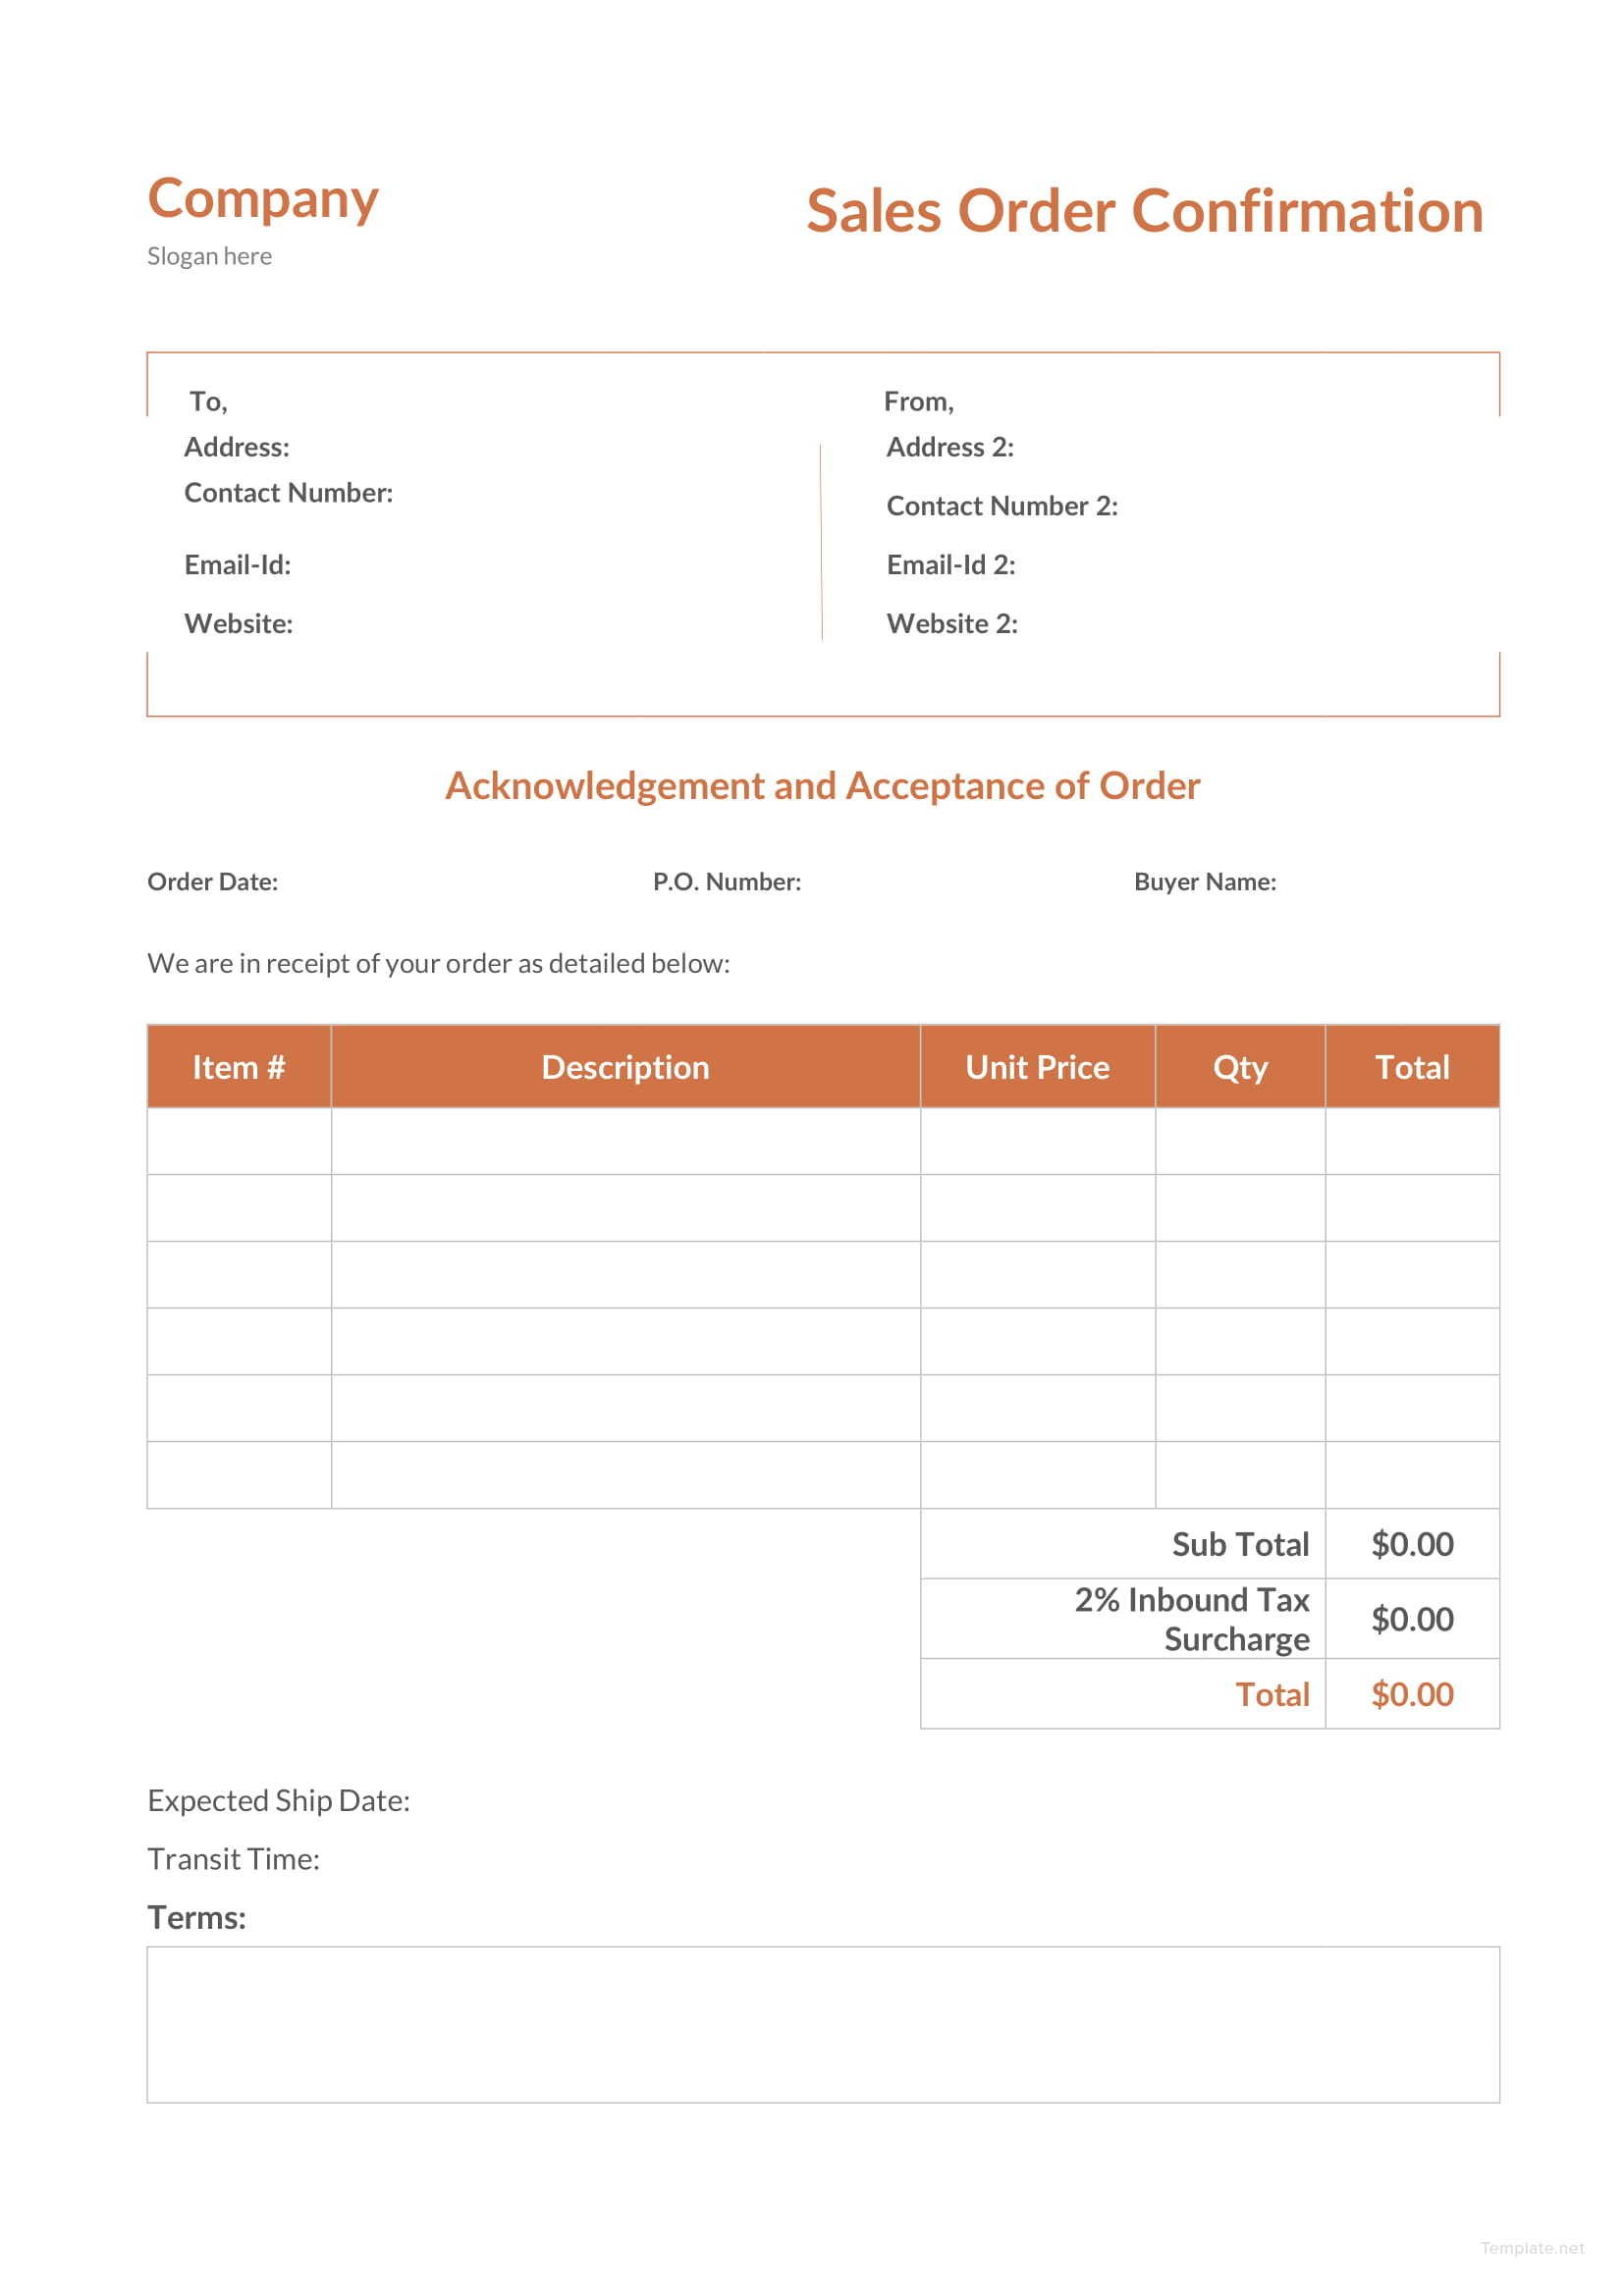 Sales Order Confirmation Template in Microsoft Word, Excel